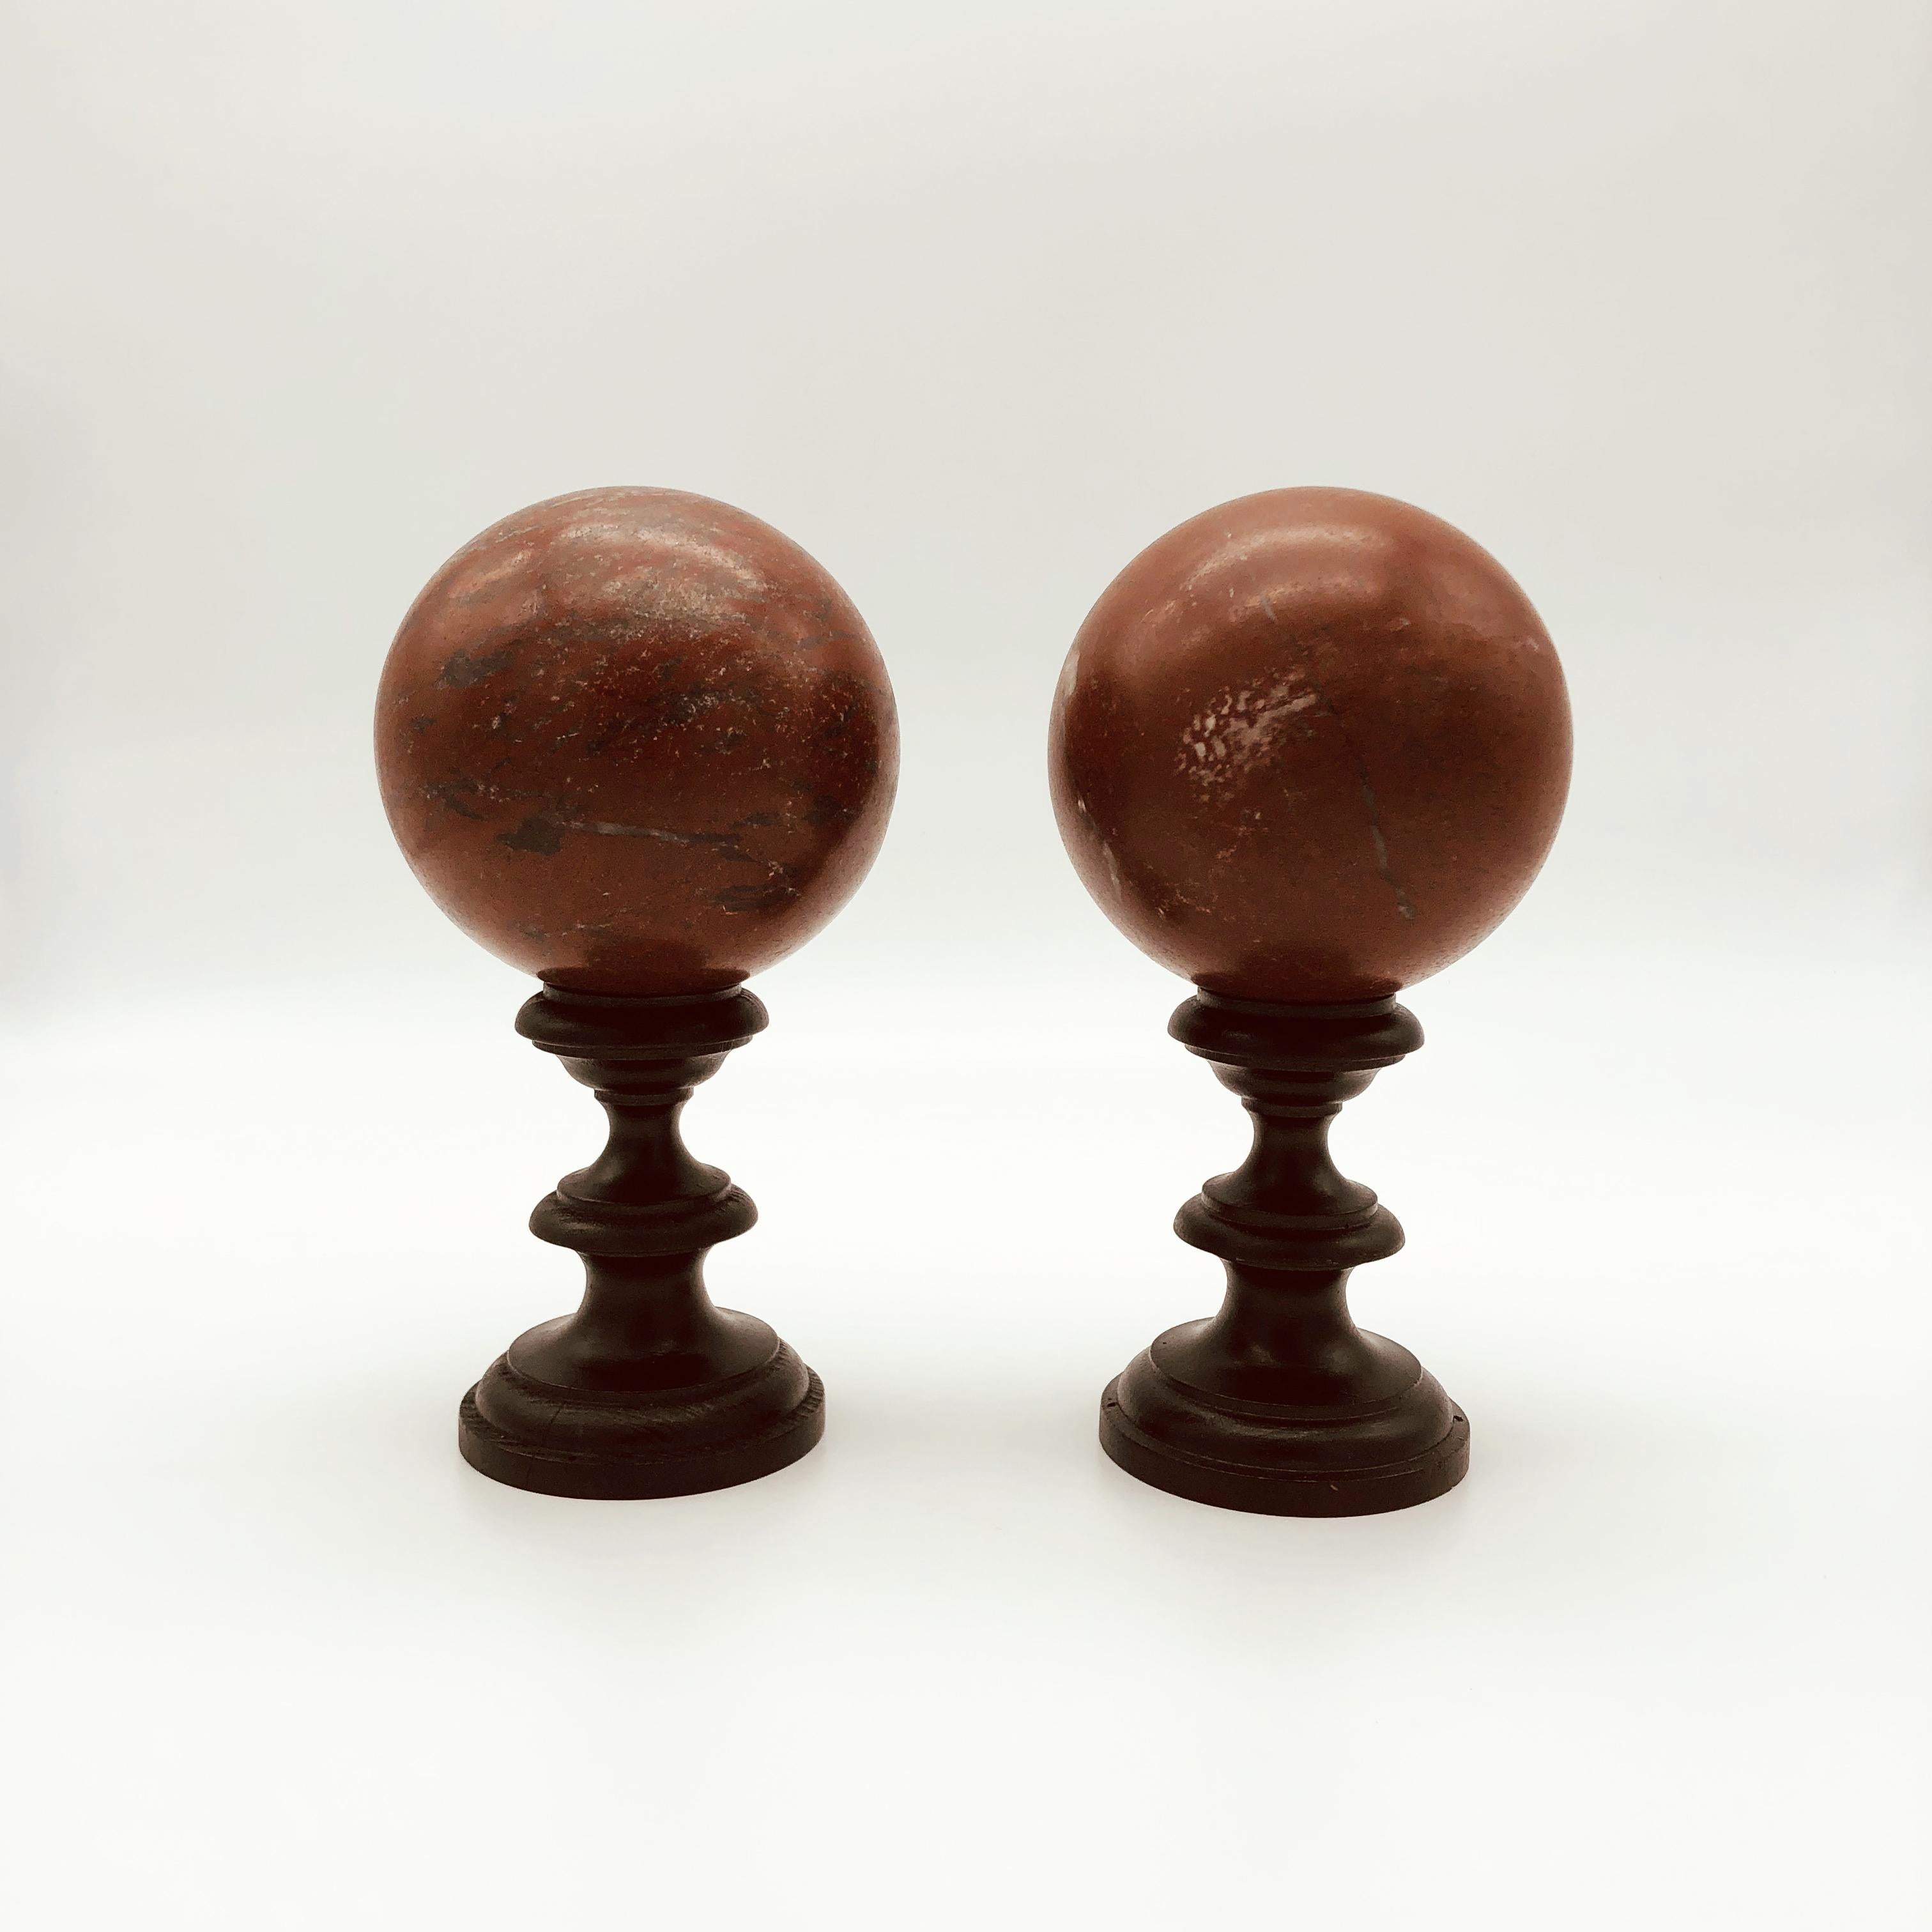 20th Century Italian Pair of Red Griotte Marble Sculpture Grand Tour Balls 1